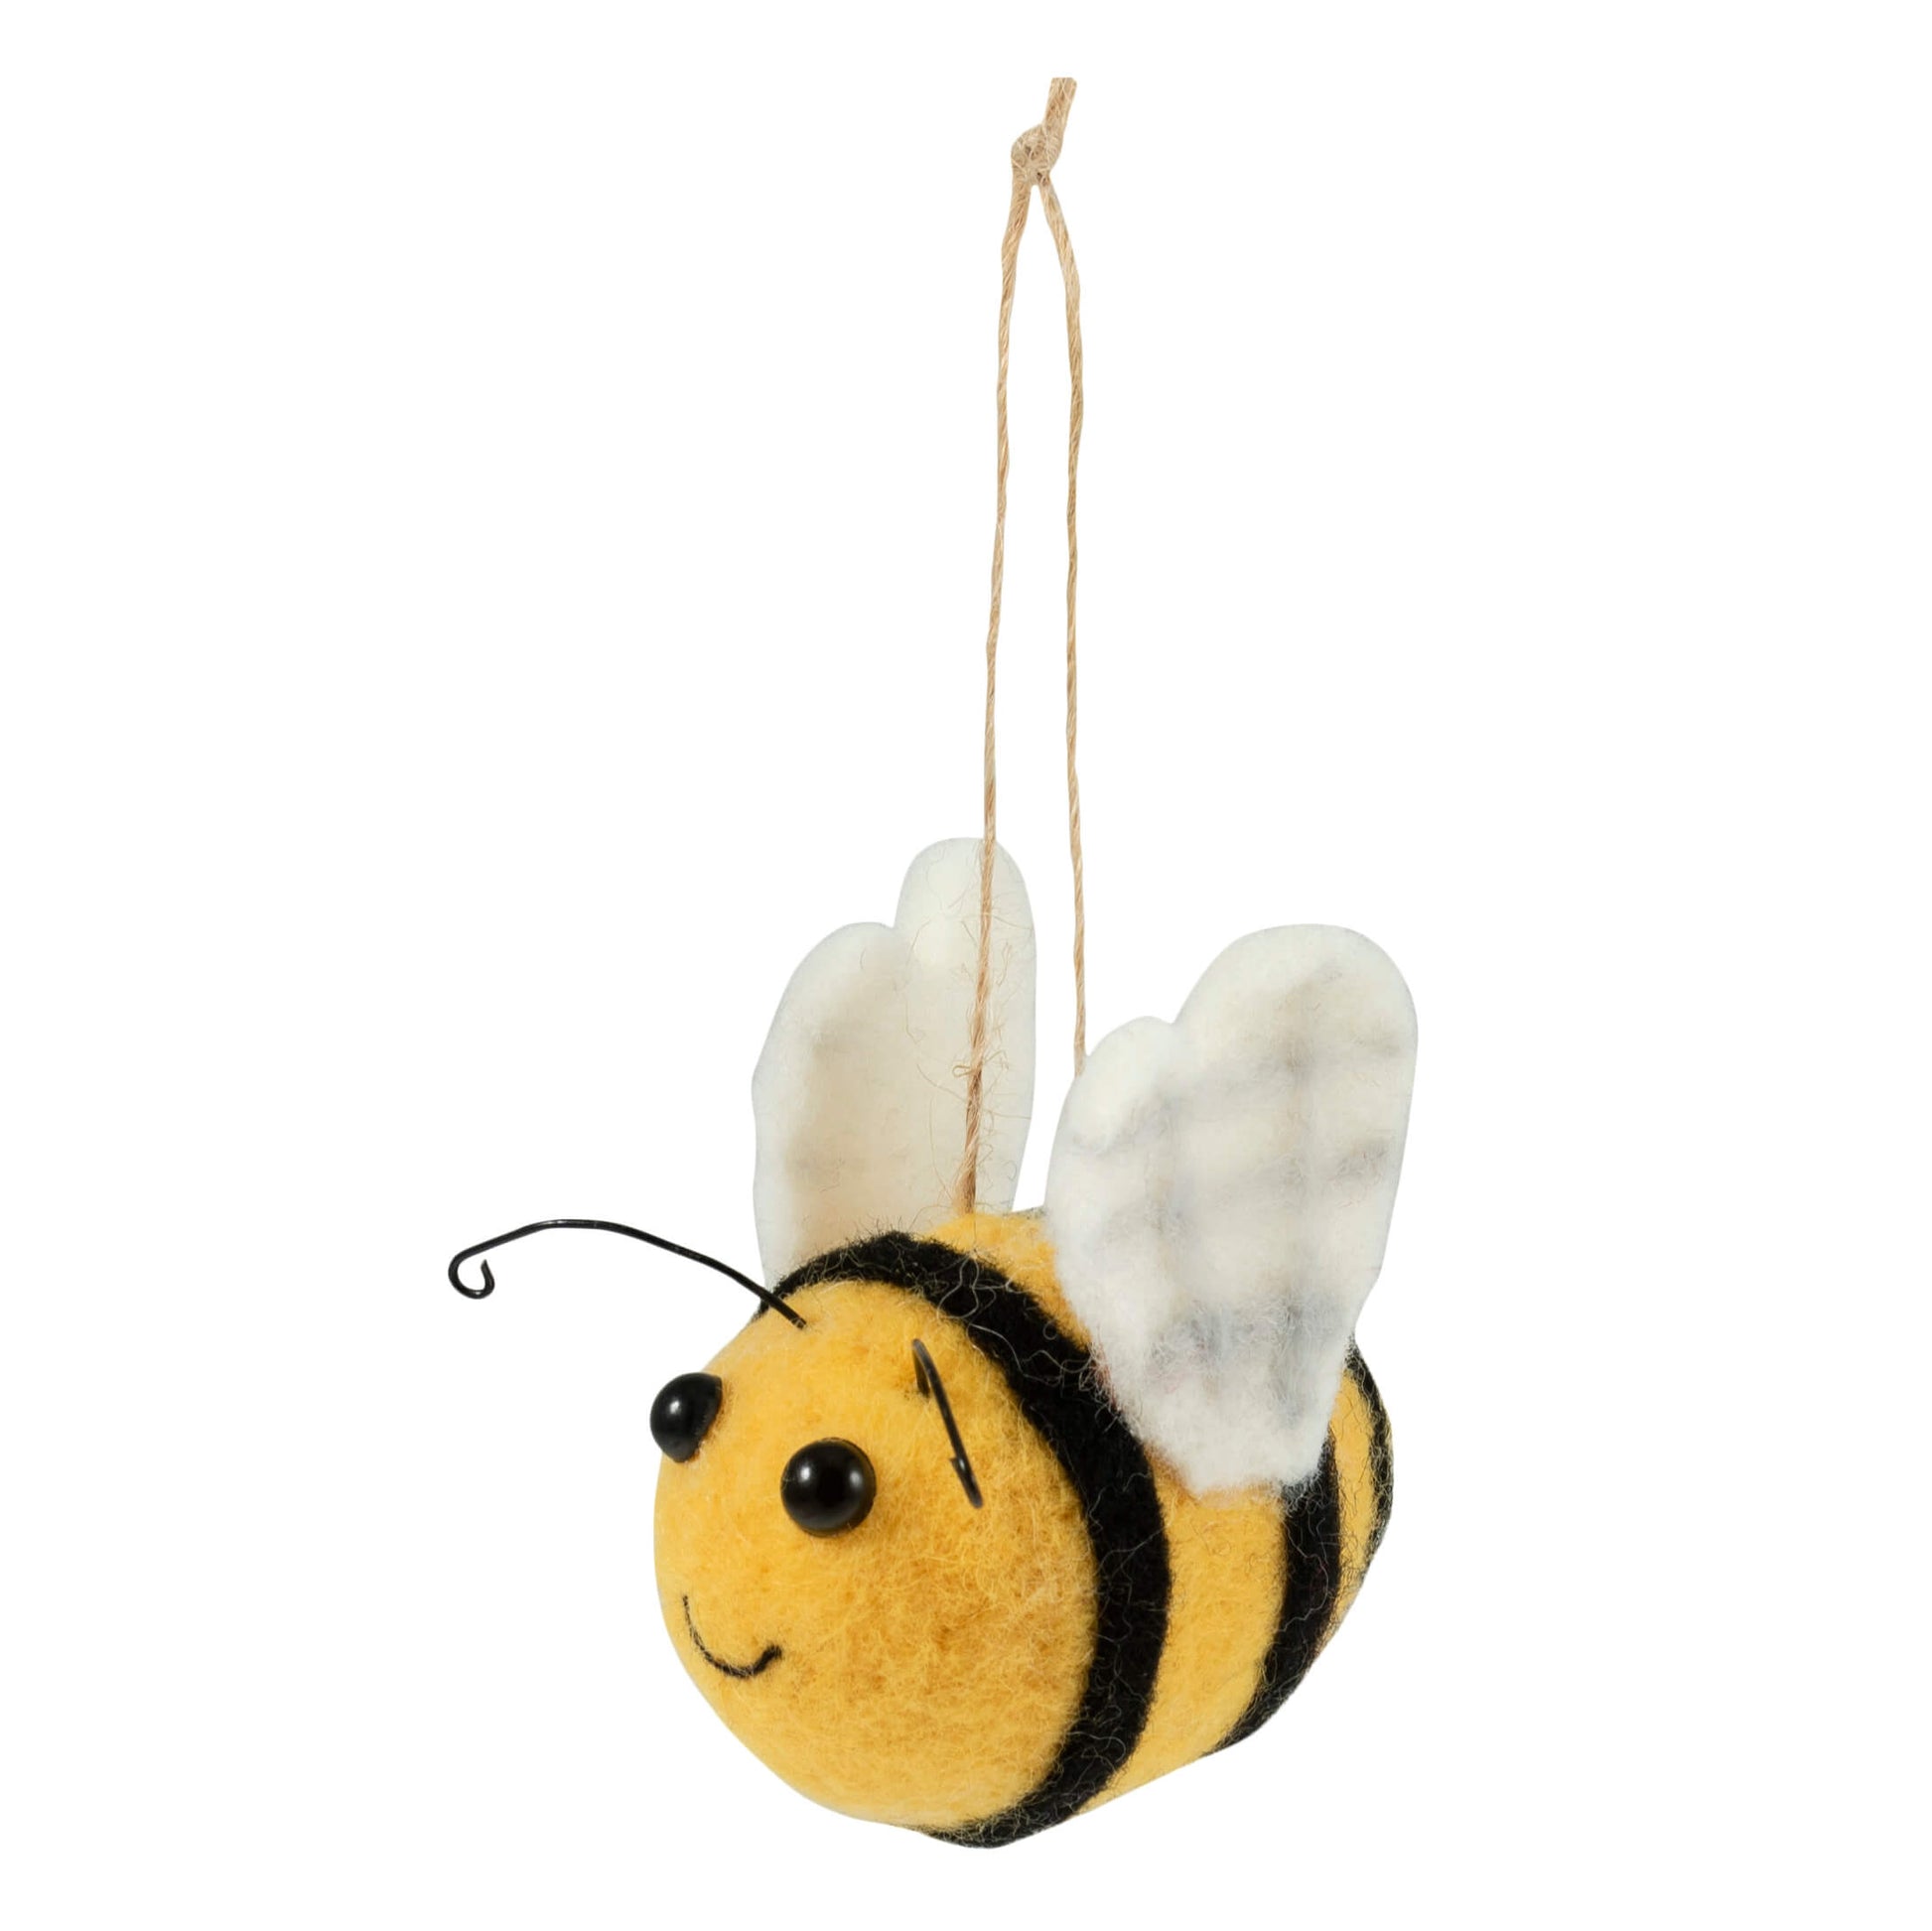 The image shows a felt bee ornament hanging from a string on a white background.